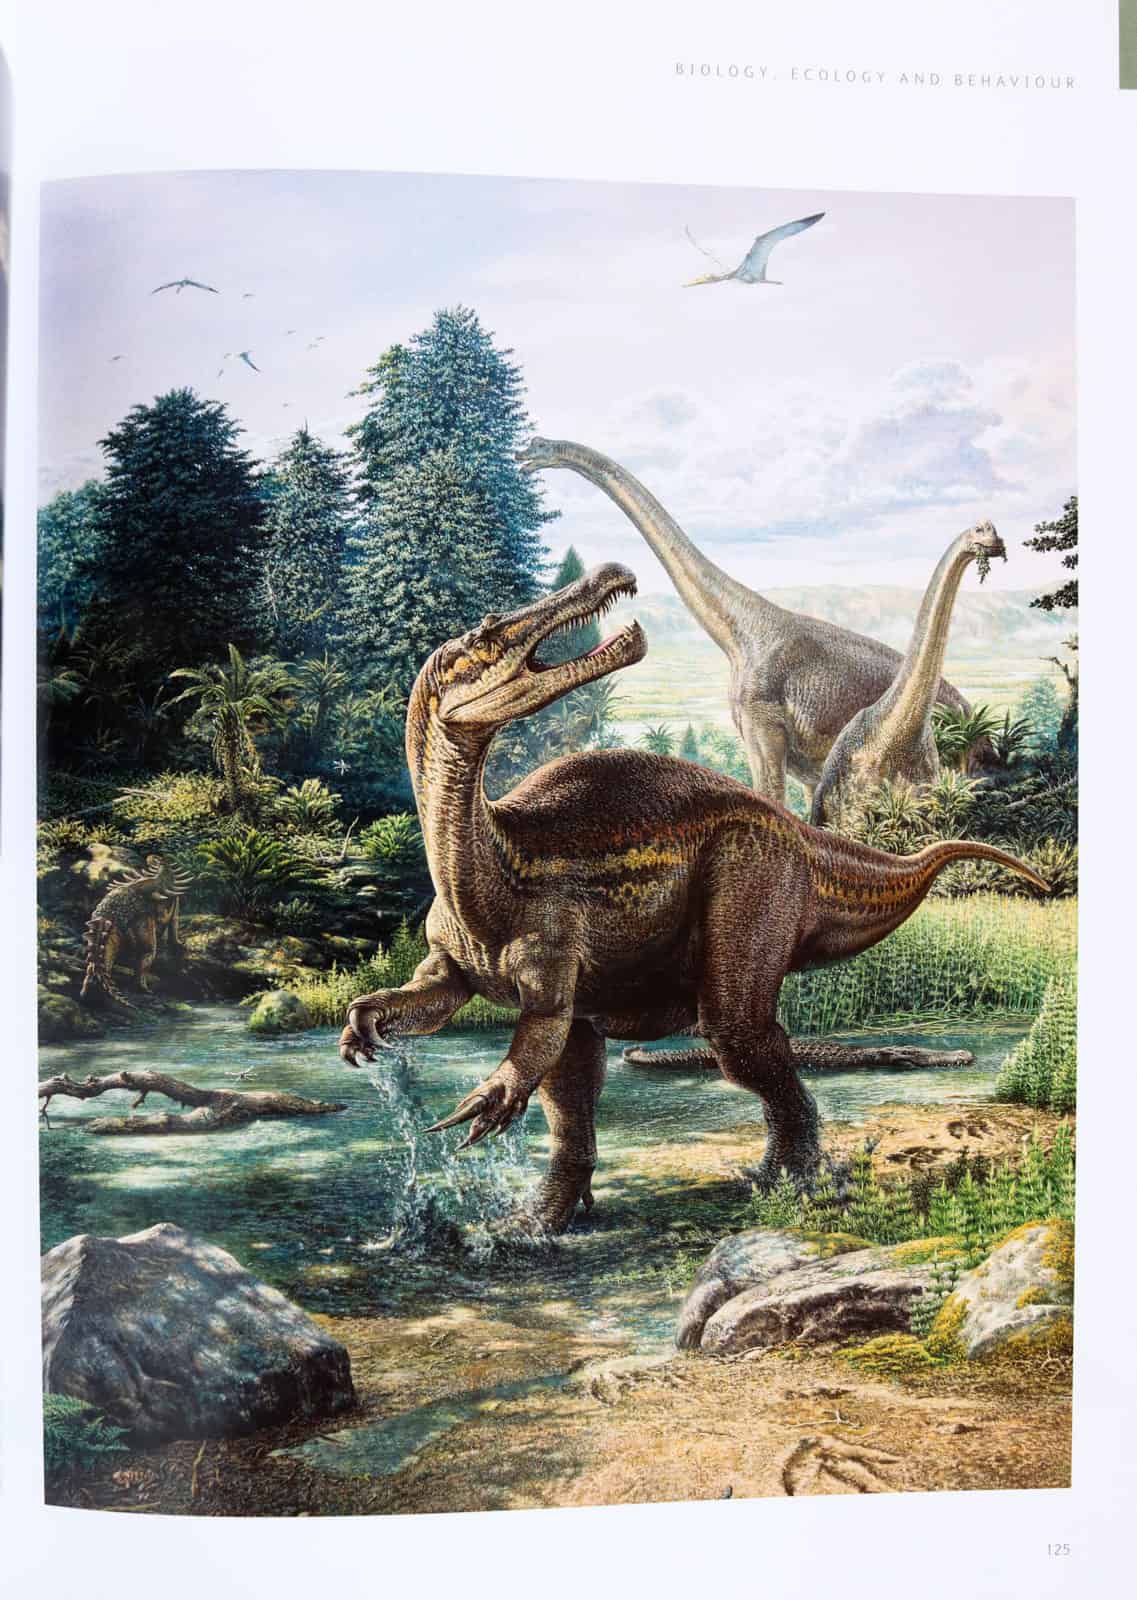 illustration of Baryonyx hunting from Dinosaurs: How They Lived and Evolved